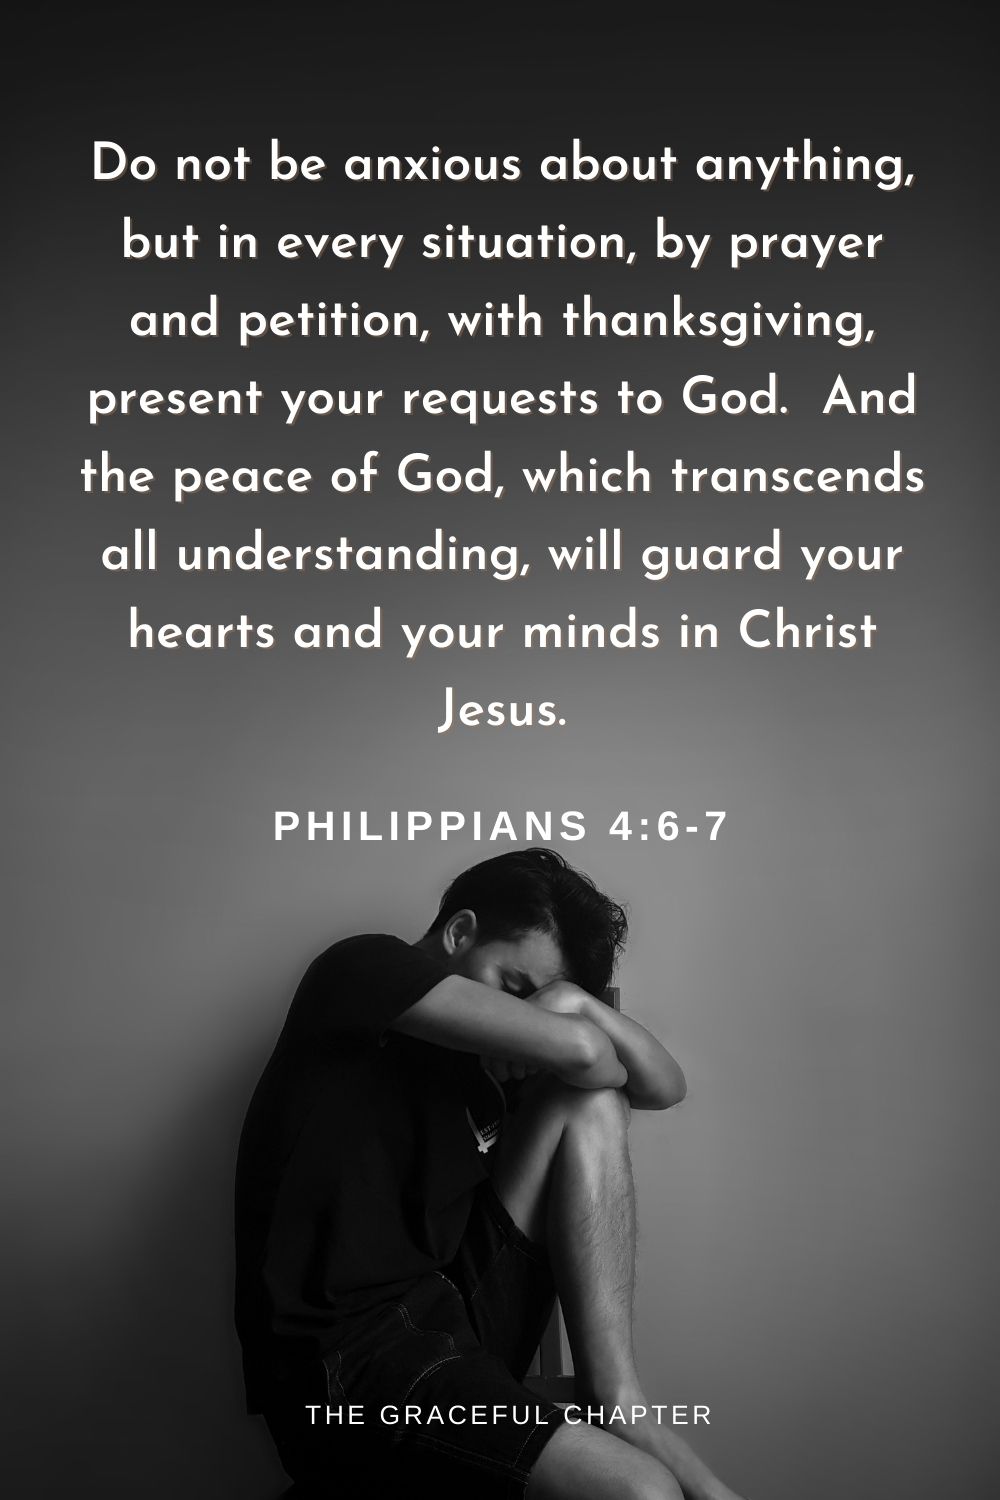 Do not be anxious about anything, but in every situation, by prayer and petition, with thanksgiving, present your requests to God.  And the peace of God, which transcends all understanding, will guard your hearts and your minds in Christ Jesus.